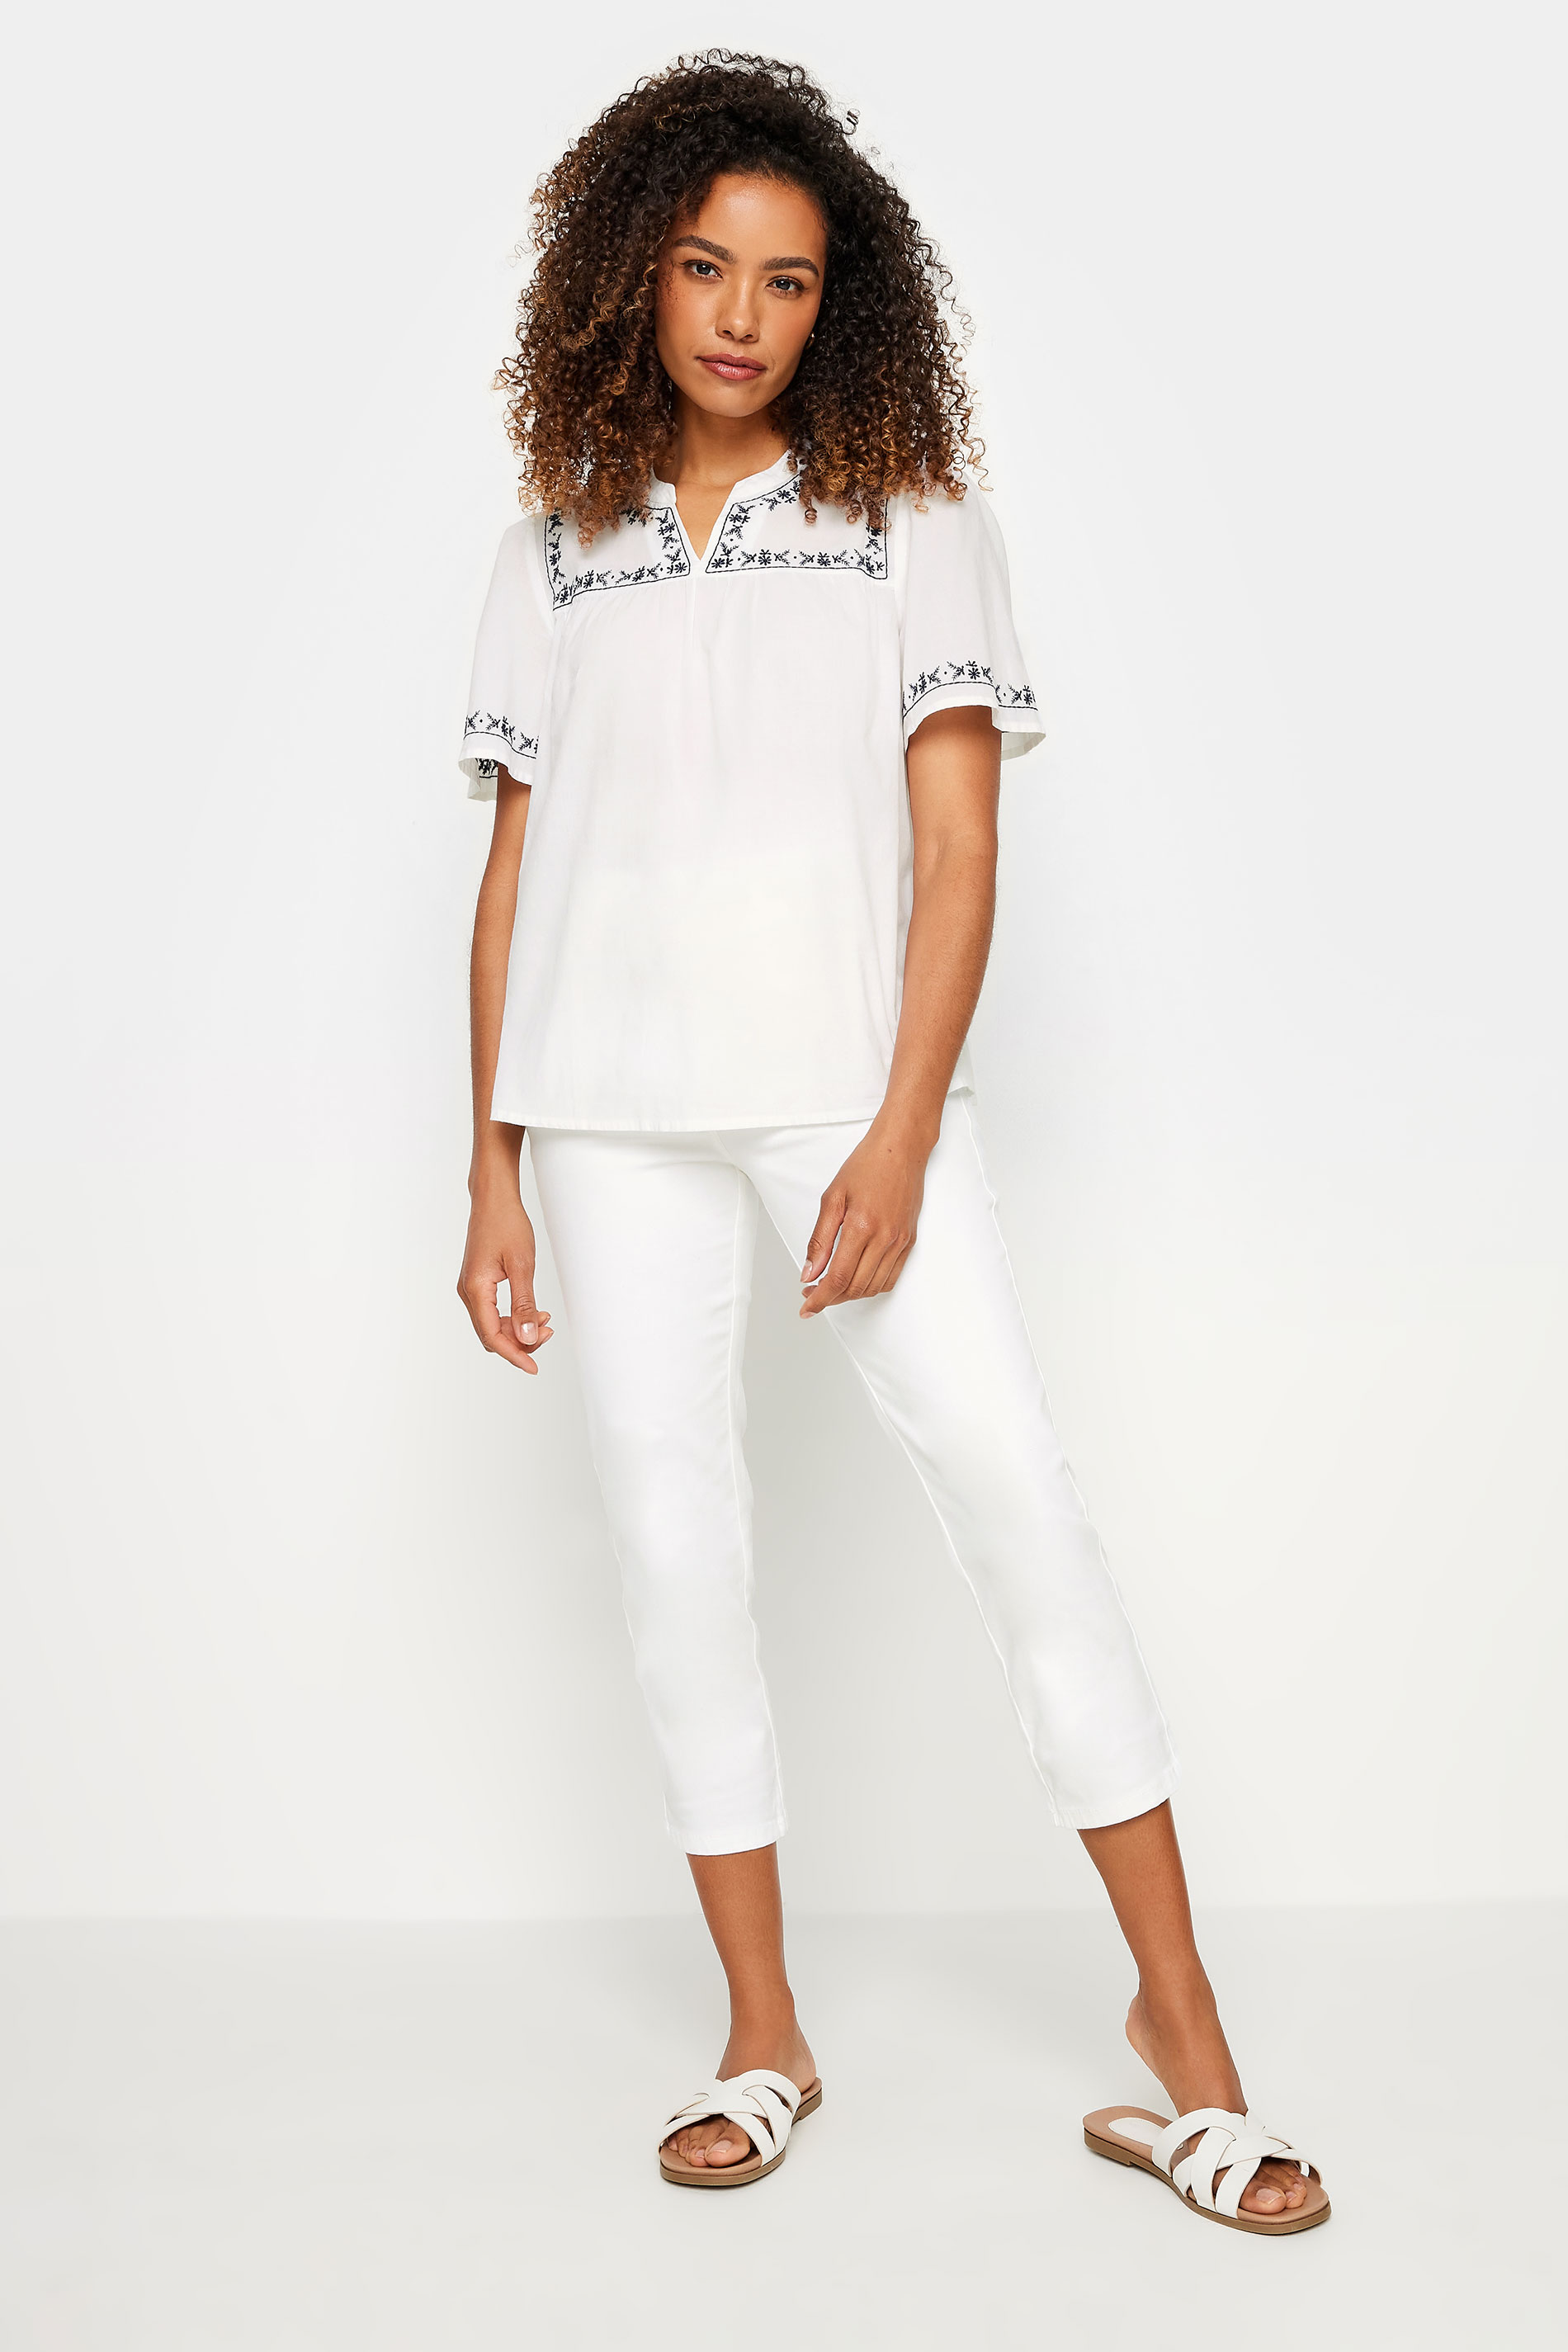 M&Co White Embroidered Cotton Dobby Blouse | M&Co 3